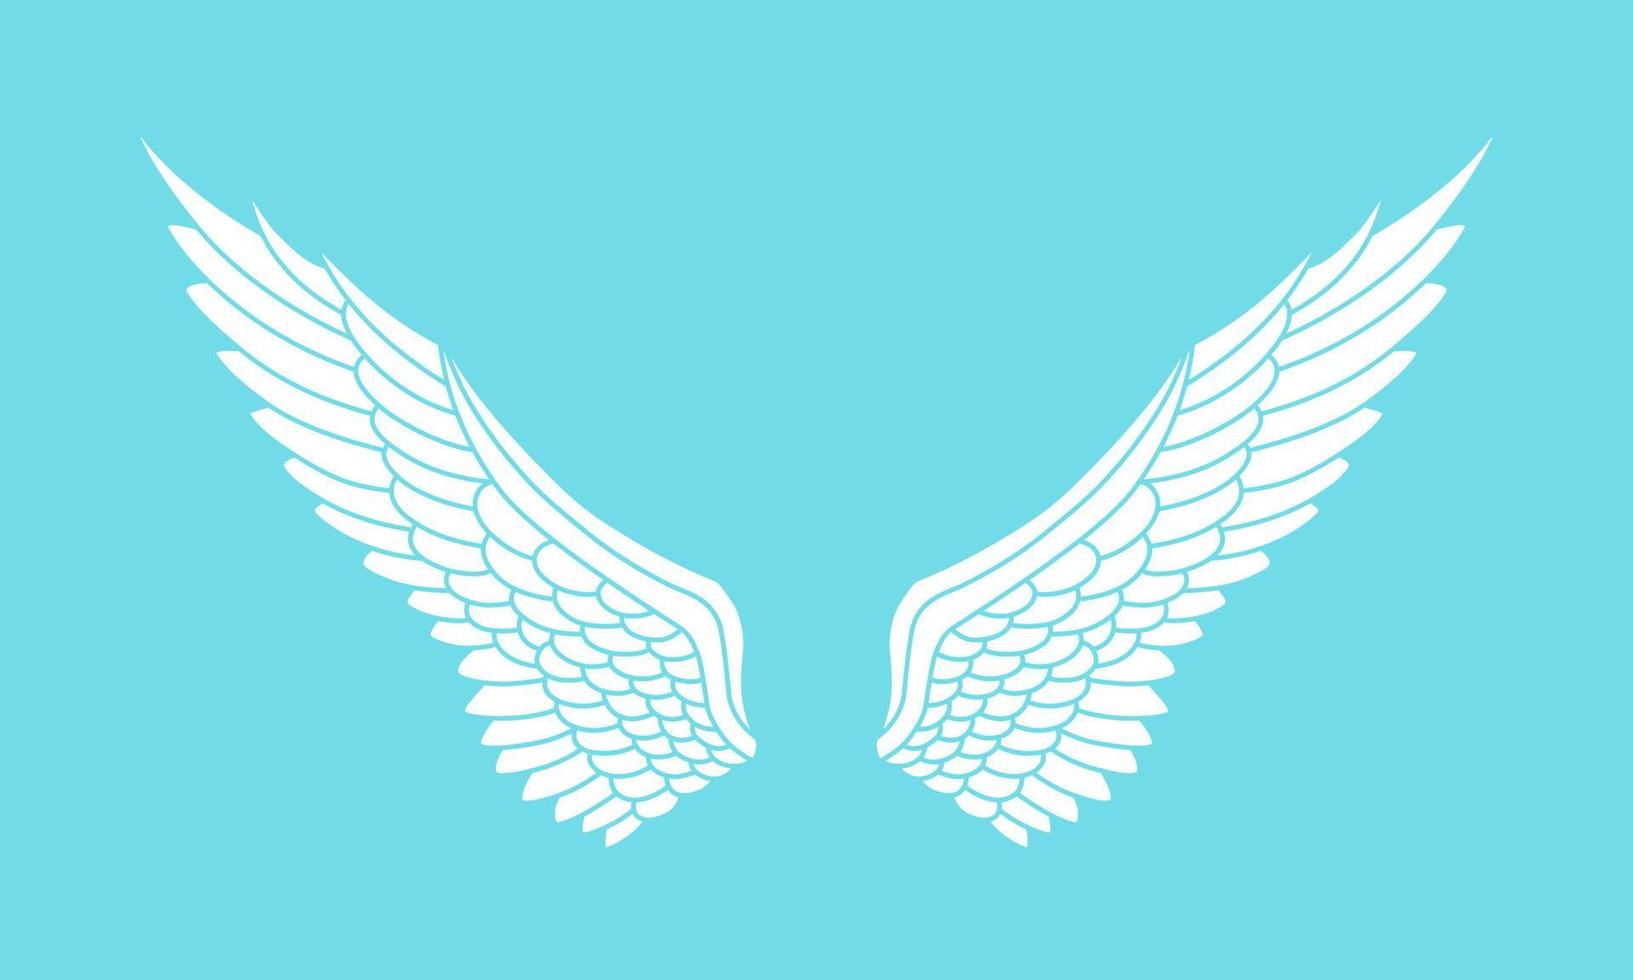 Vector logo icon white angel wings